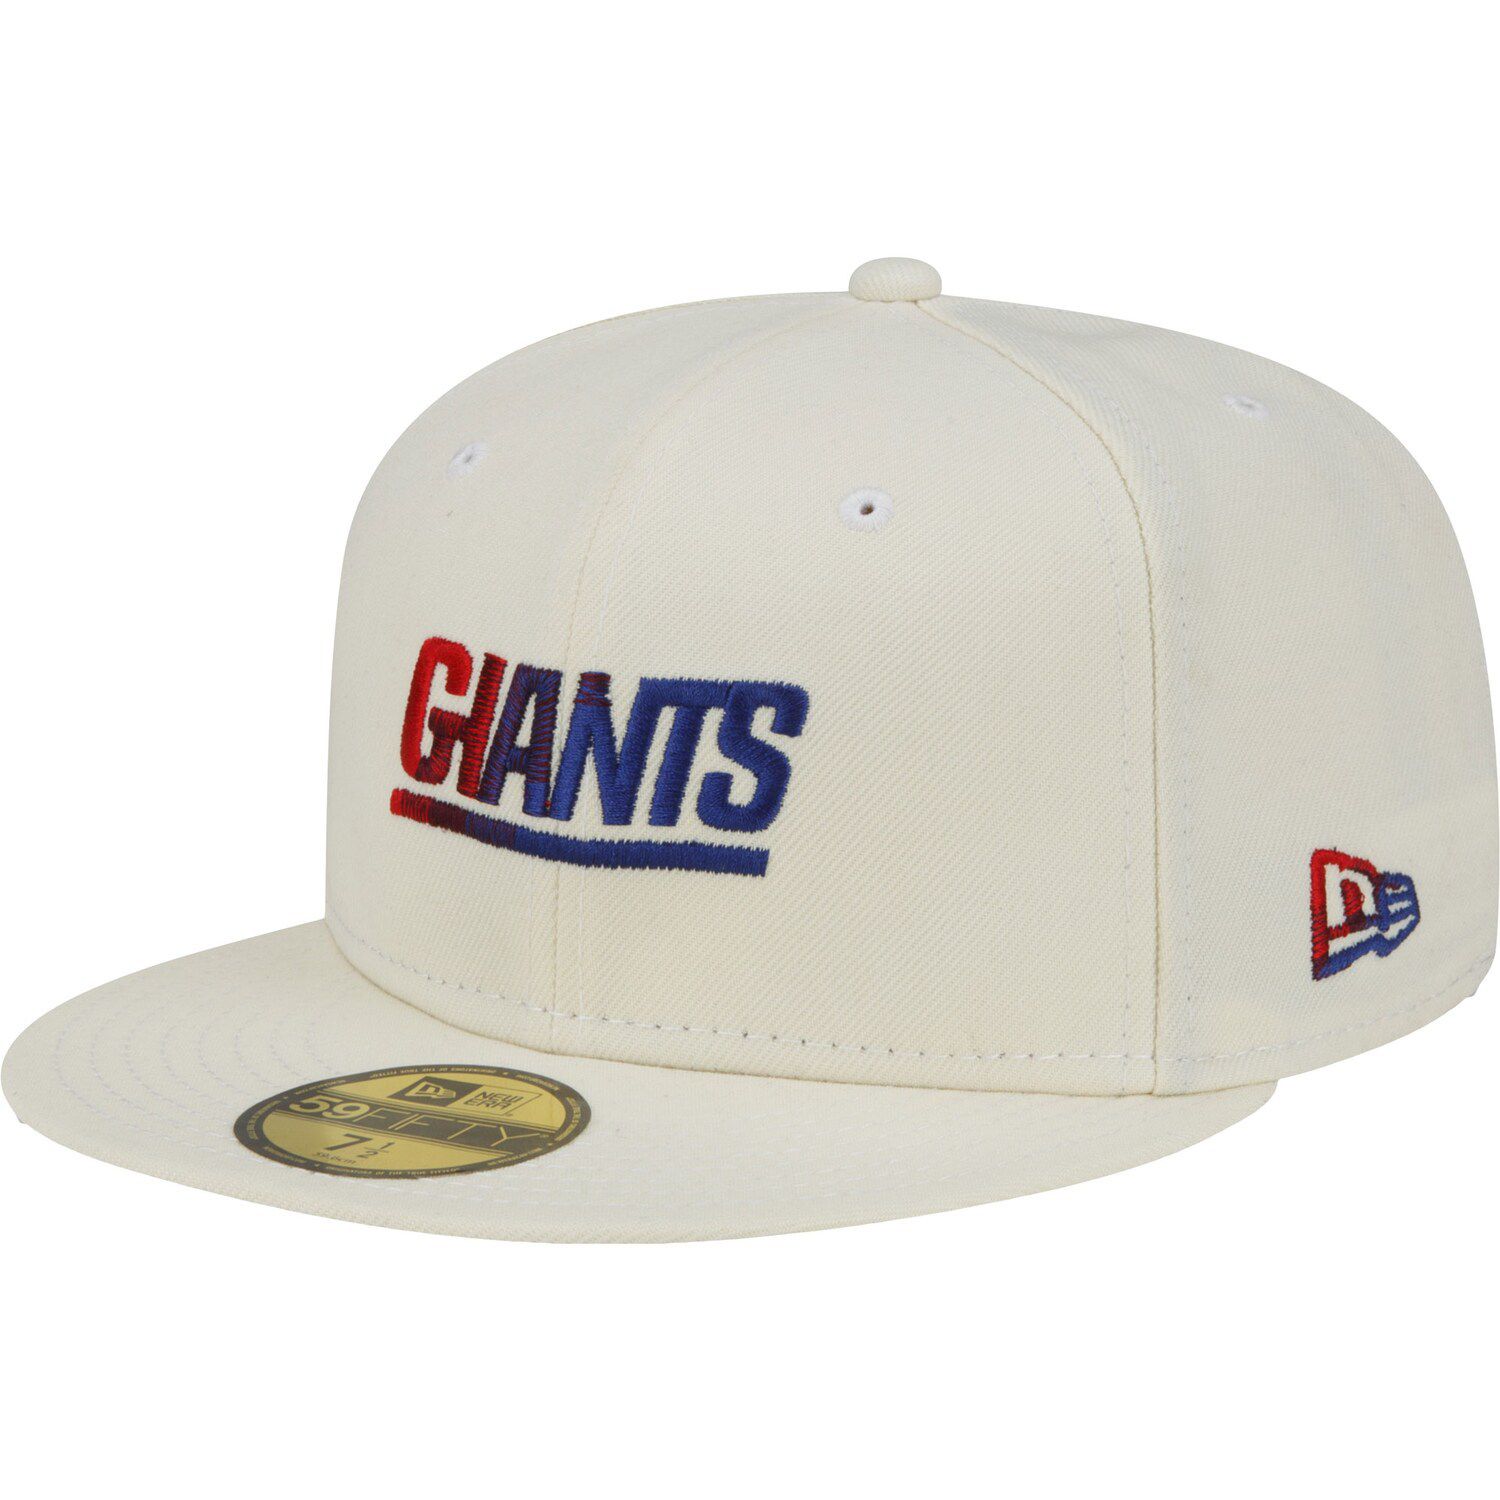 Youth Mitchell & Ness Royal New York Giants Throwback Precurve Snapback Hat